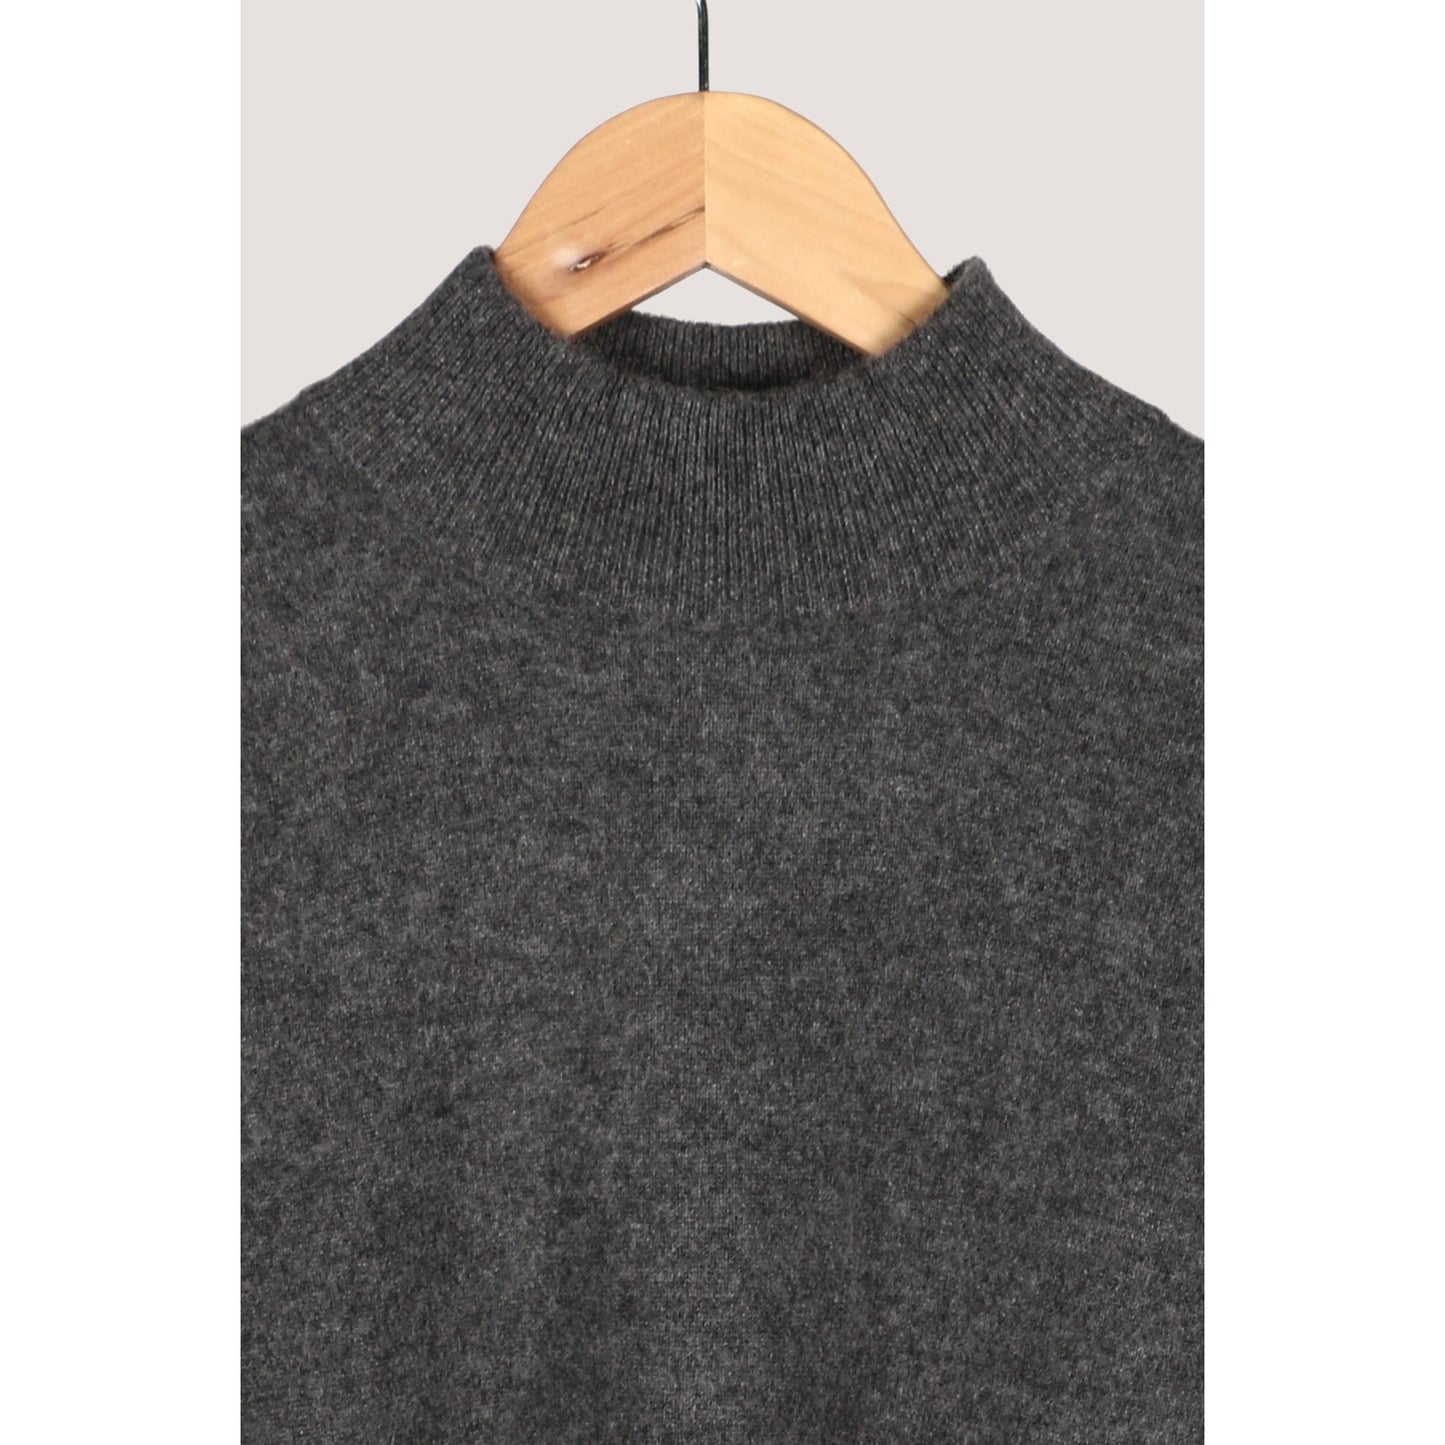 Half Roll Neck Sweater Charcoal - Crumpet Chowk